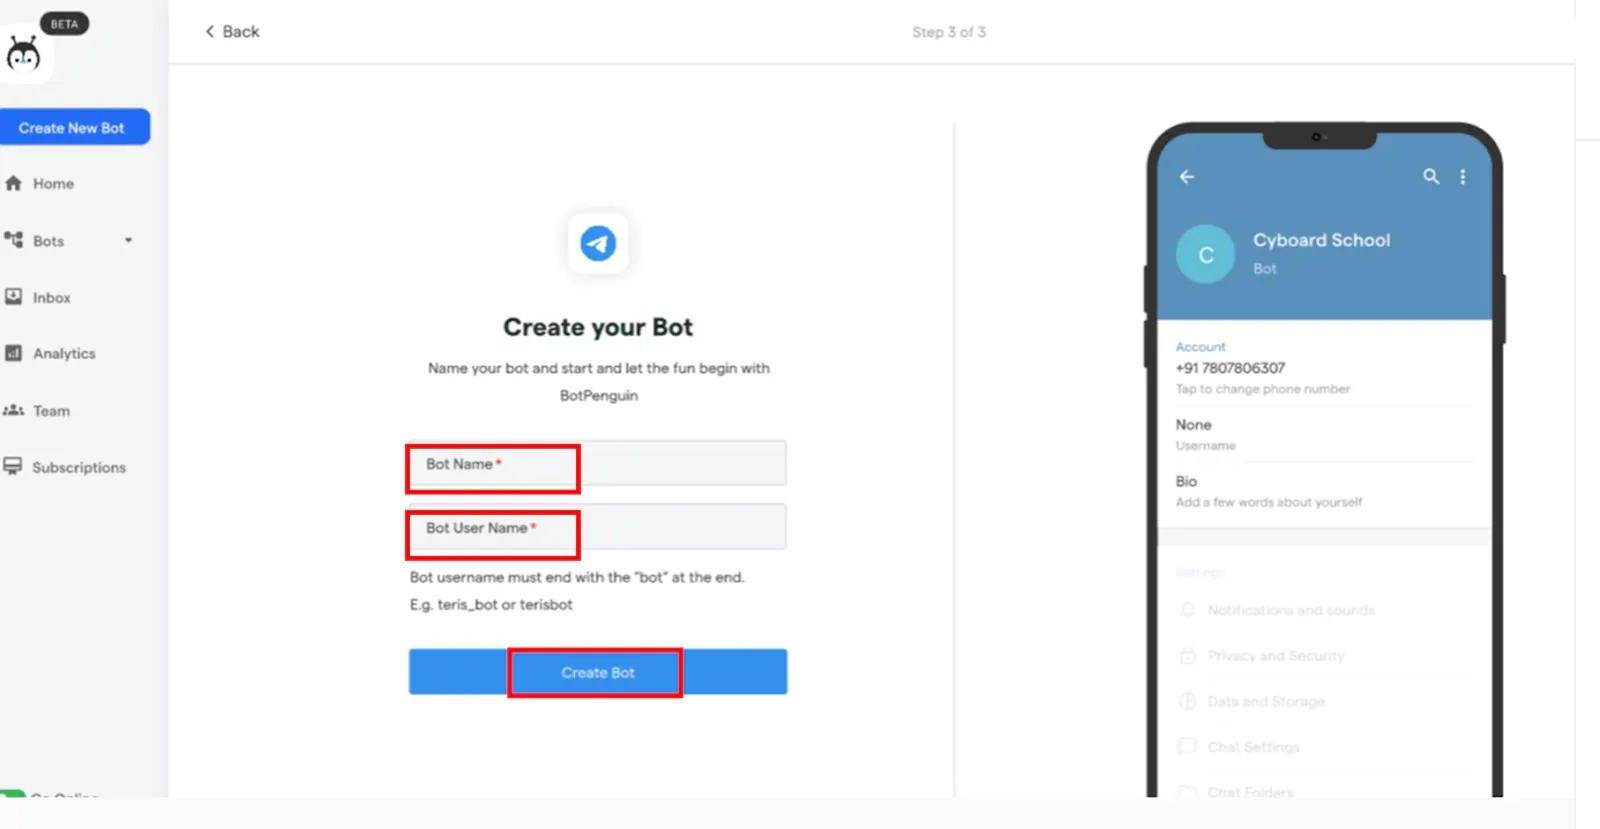 Create your bot